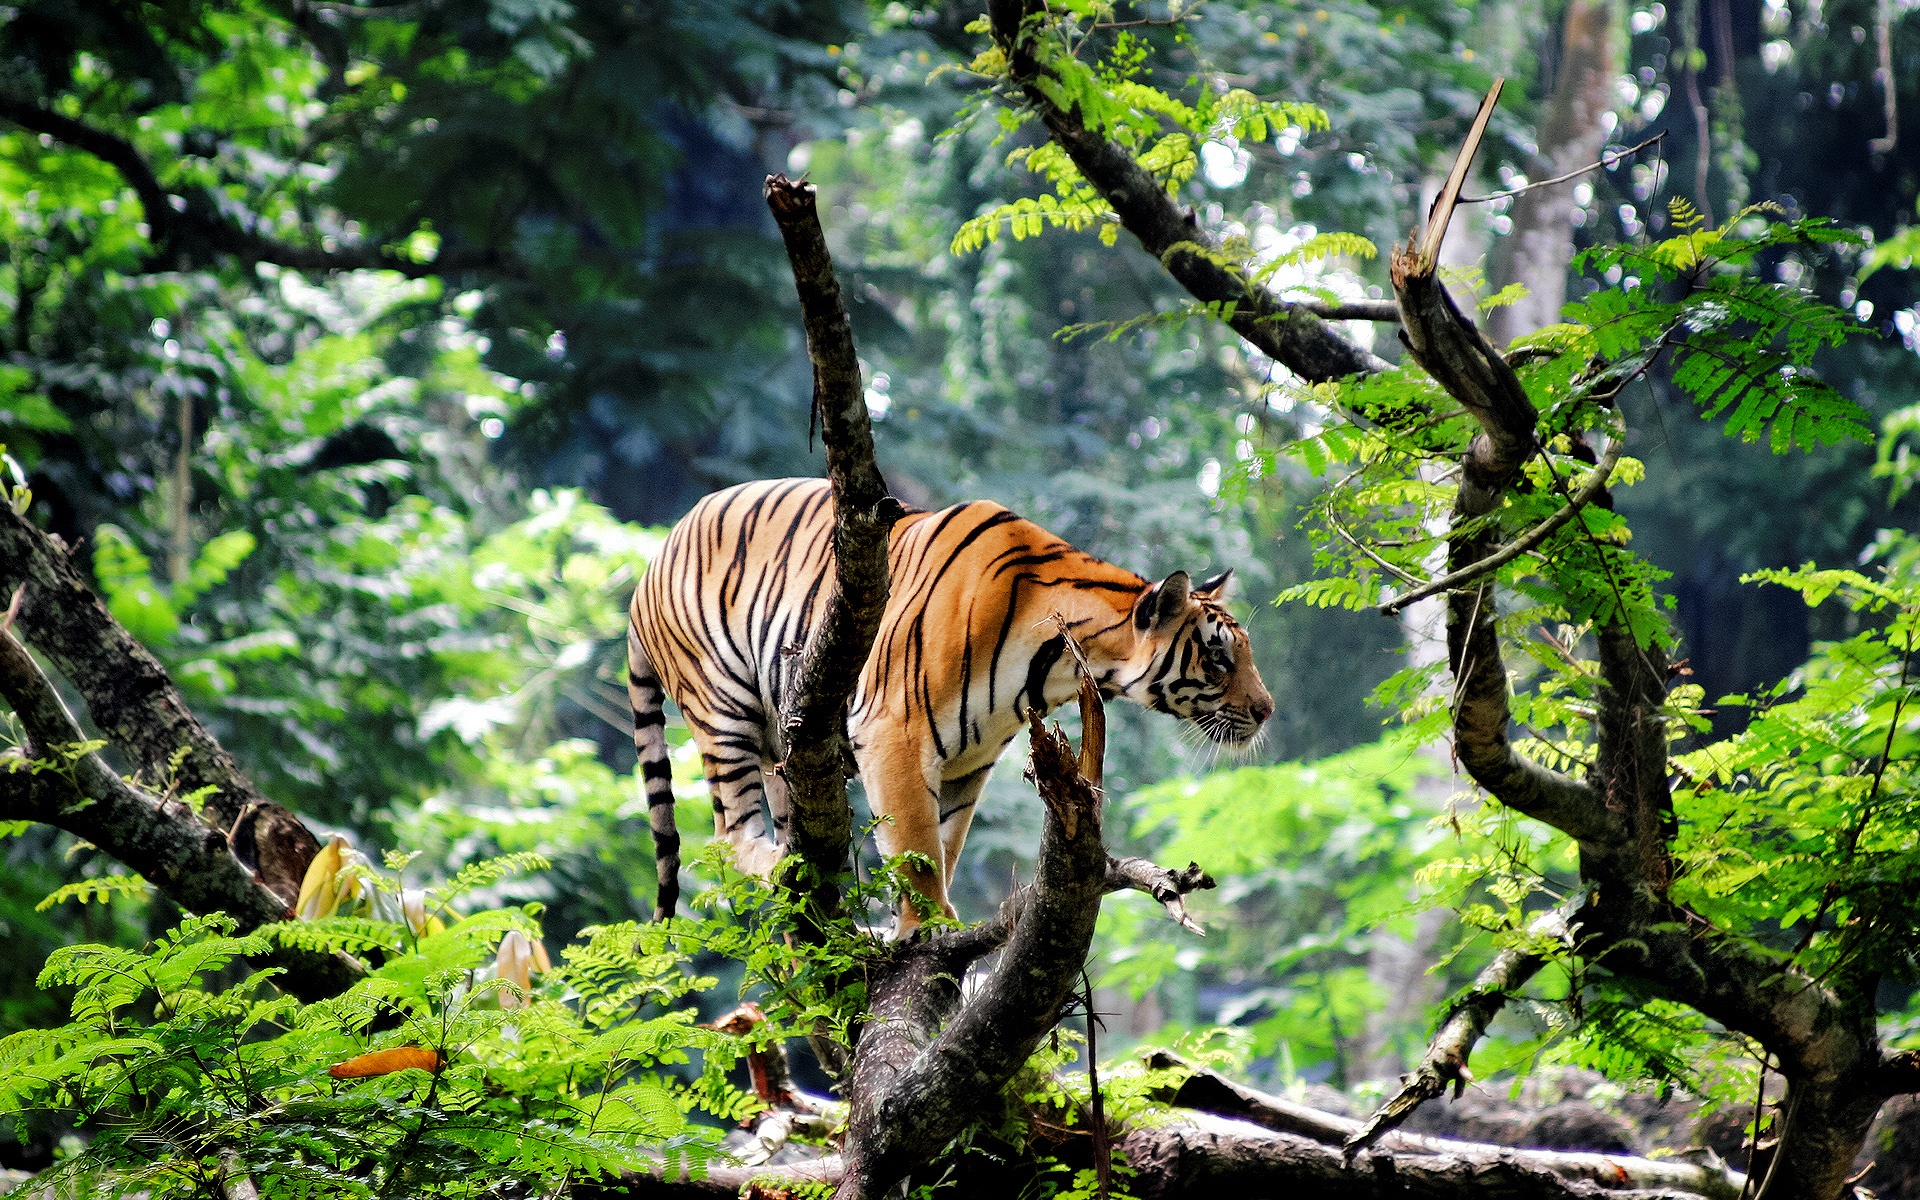 Bengal Tiger in Jungle Wallpaper in jpg format for free download